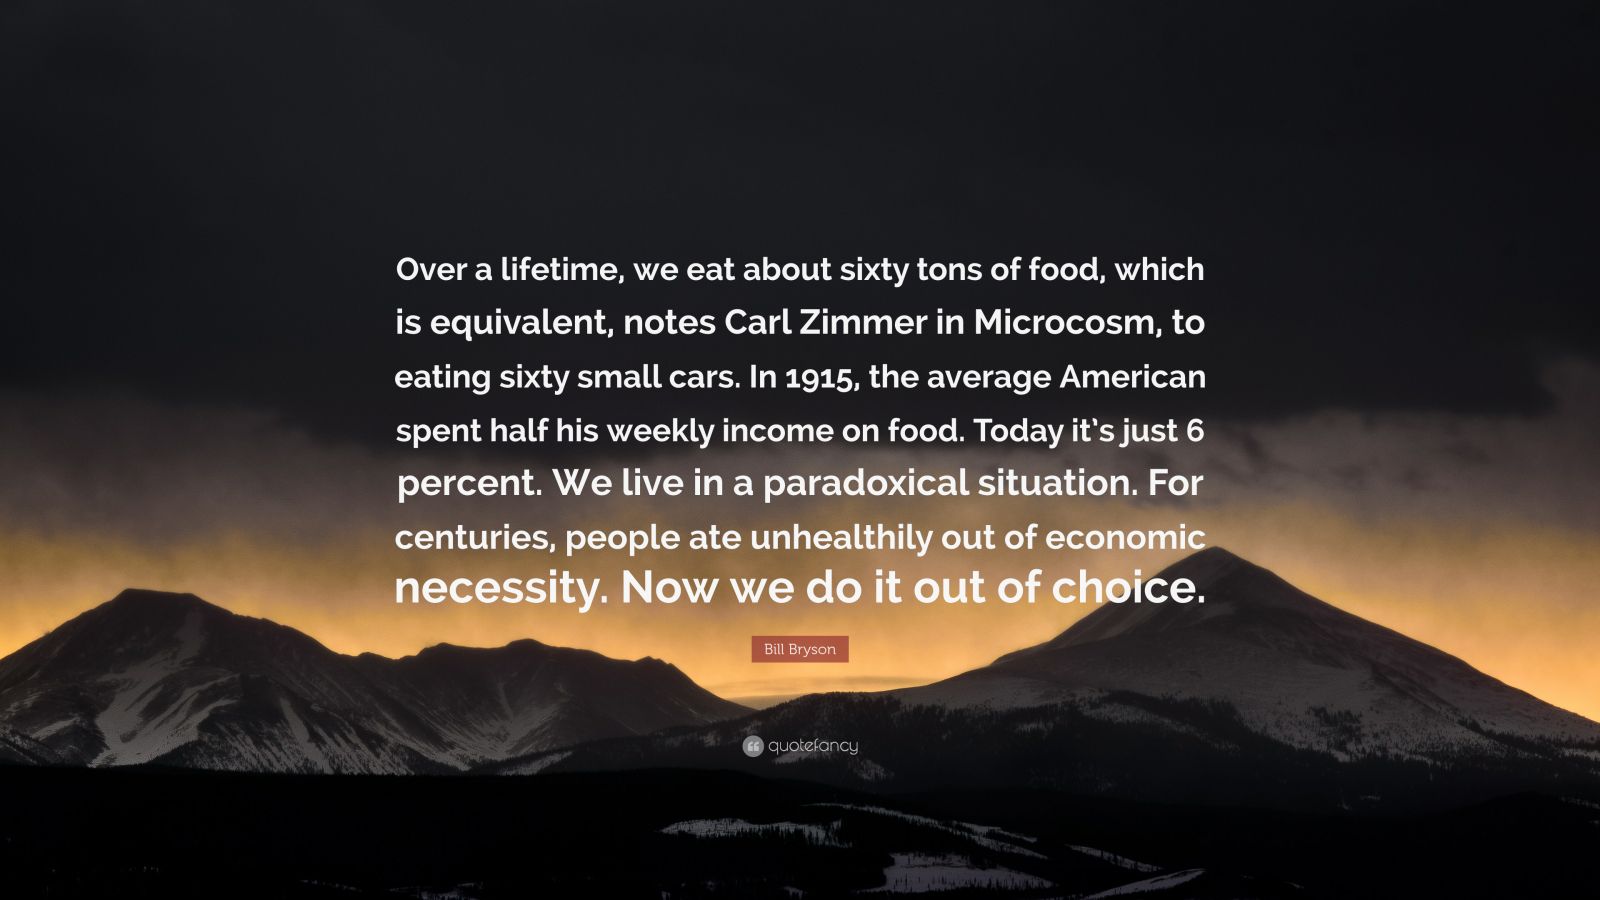 Bill Bryson Quote: “Over lifetime, we about sixty tons of food, which is equivalent, notes Carl Zimmer in Microcosm, to eating sixty s...”